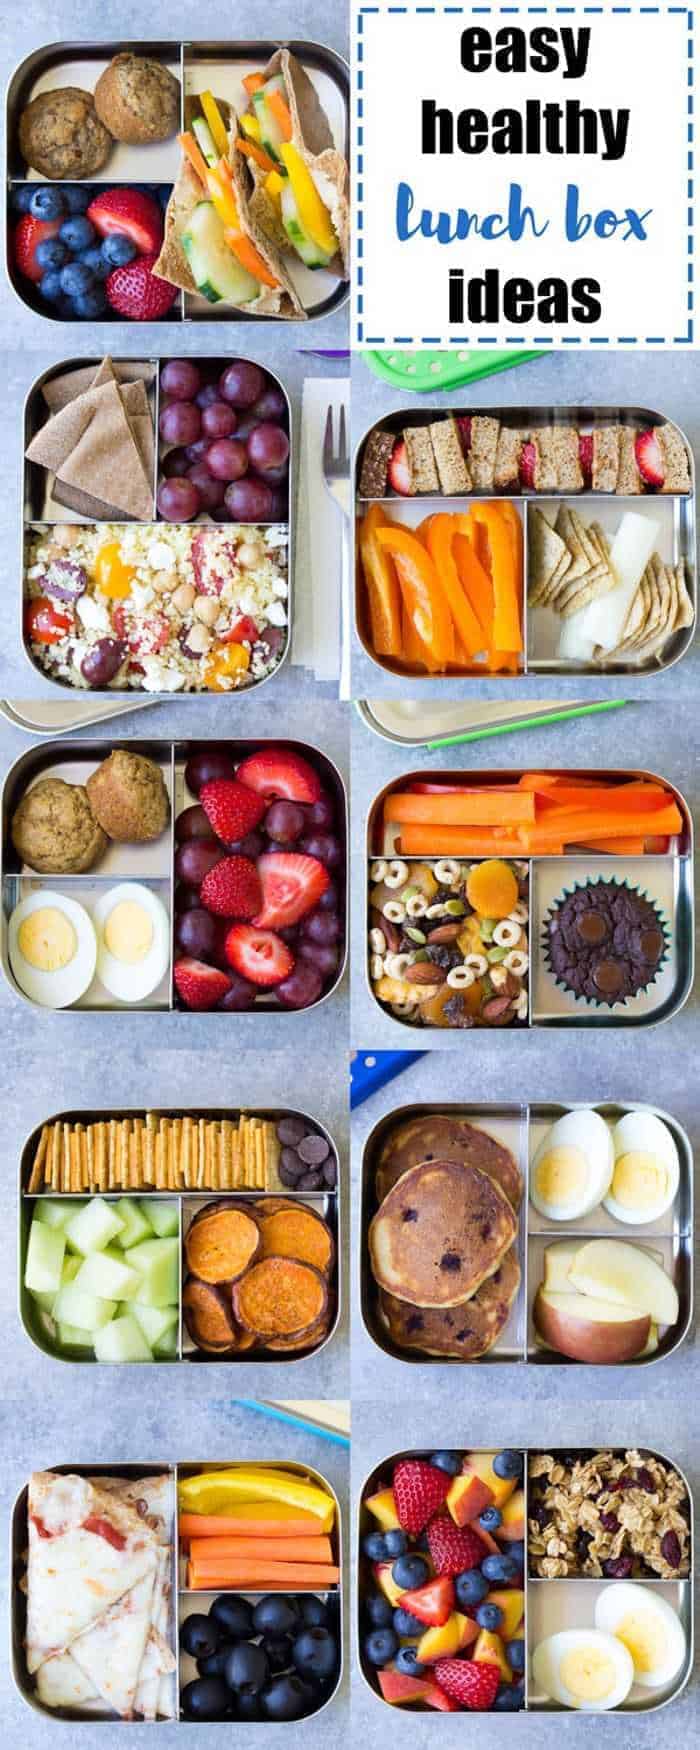 https://www.squirrelsofafeather.com/wp-content/uploads/2018/12/Easy-Healthy-Lunch-Box-Ideas.jpeg